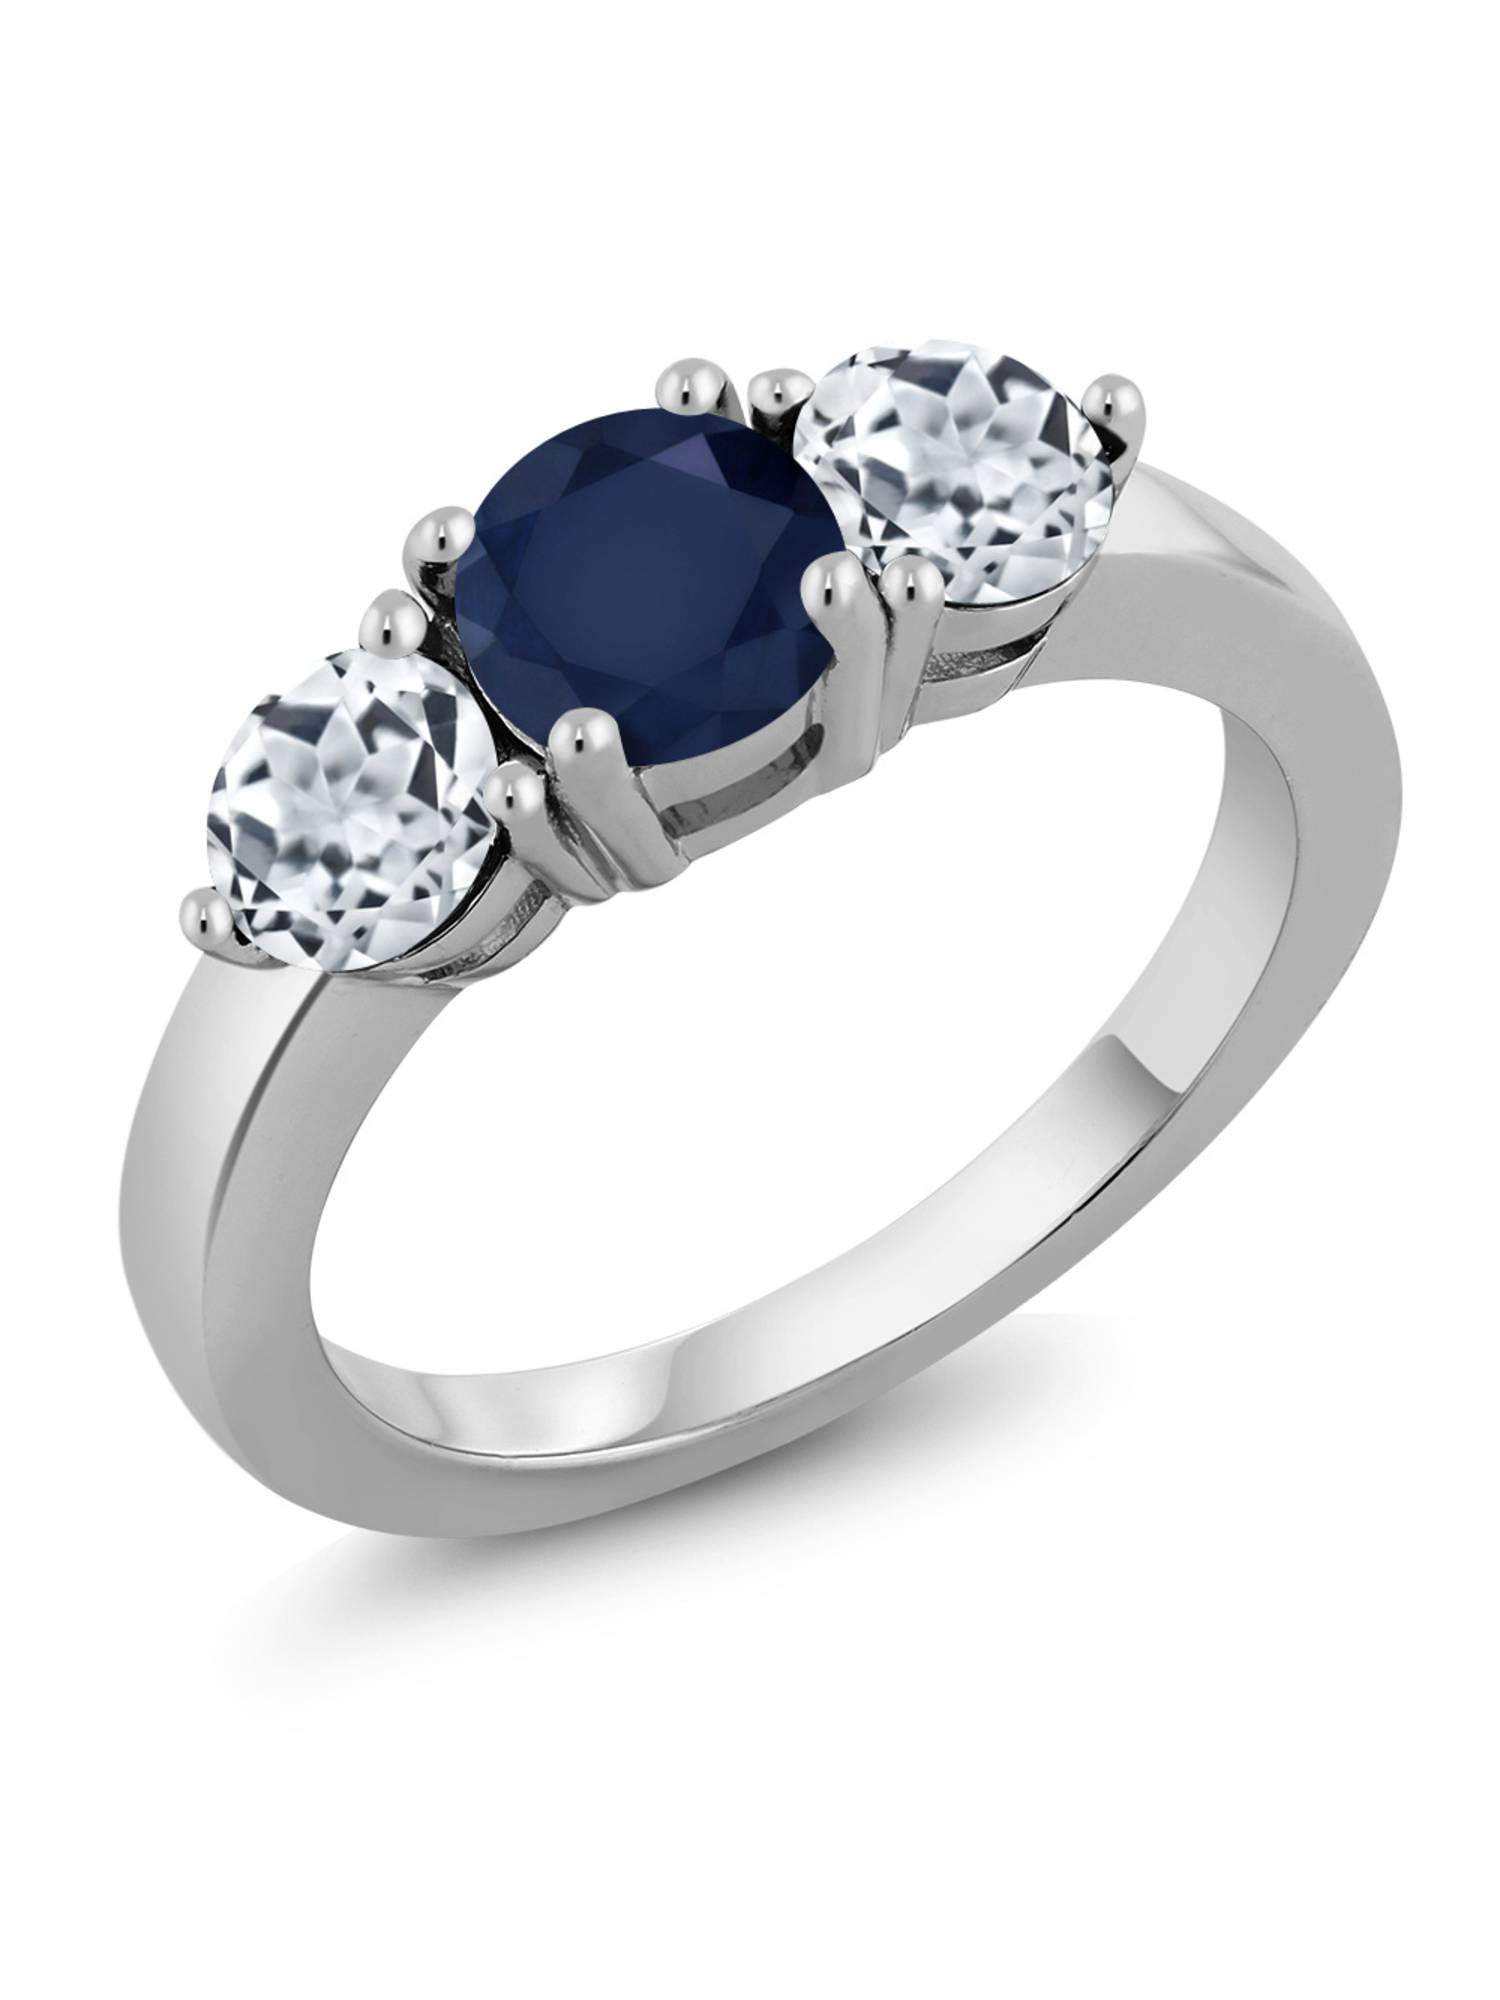 1.43Ct Round 3Stone Moissanite Sapphire Engagement Ring With 925 Sterling Silver 